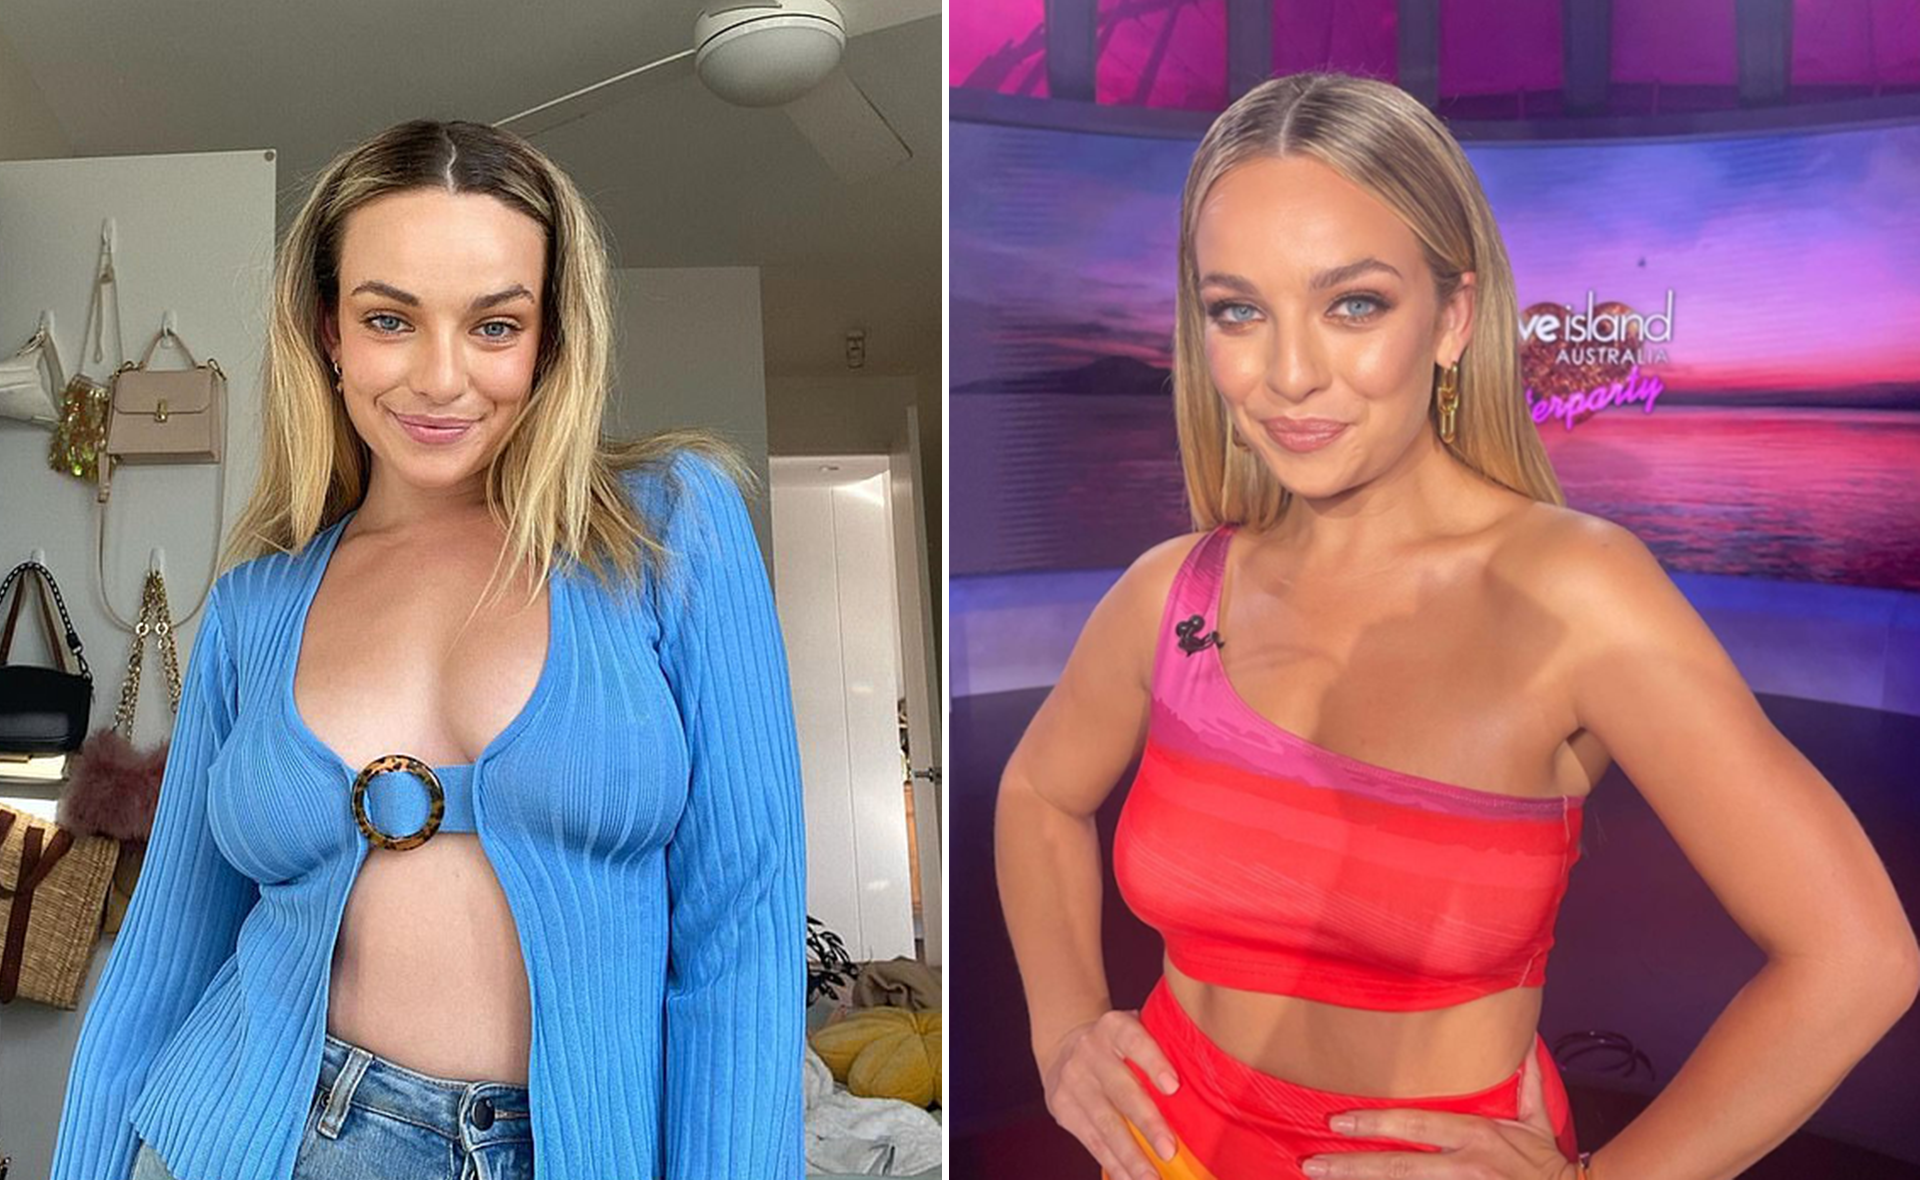 Abbie Chatfield reveals why she will never appear on another reality TV show again